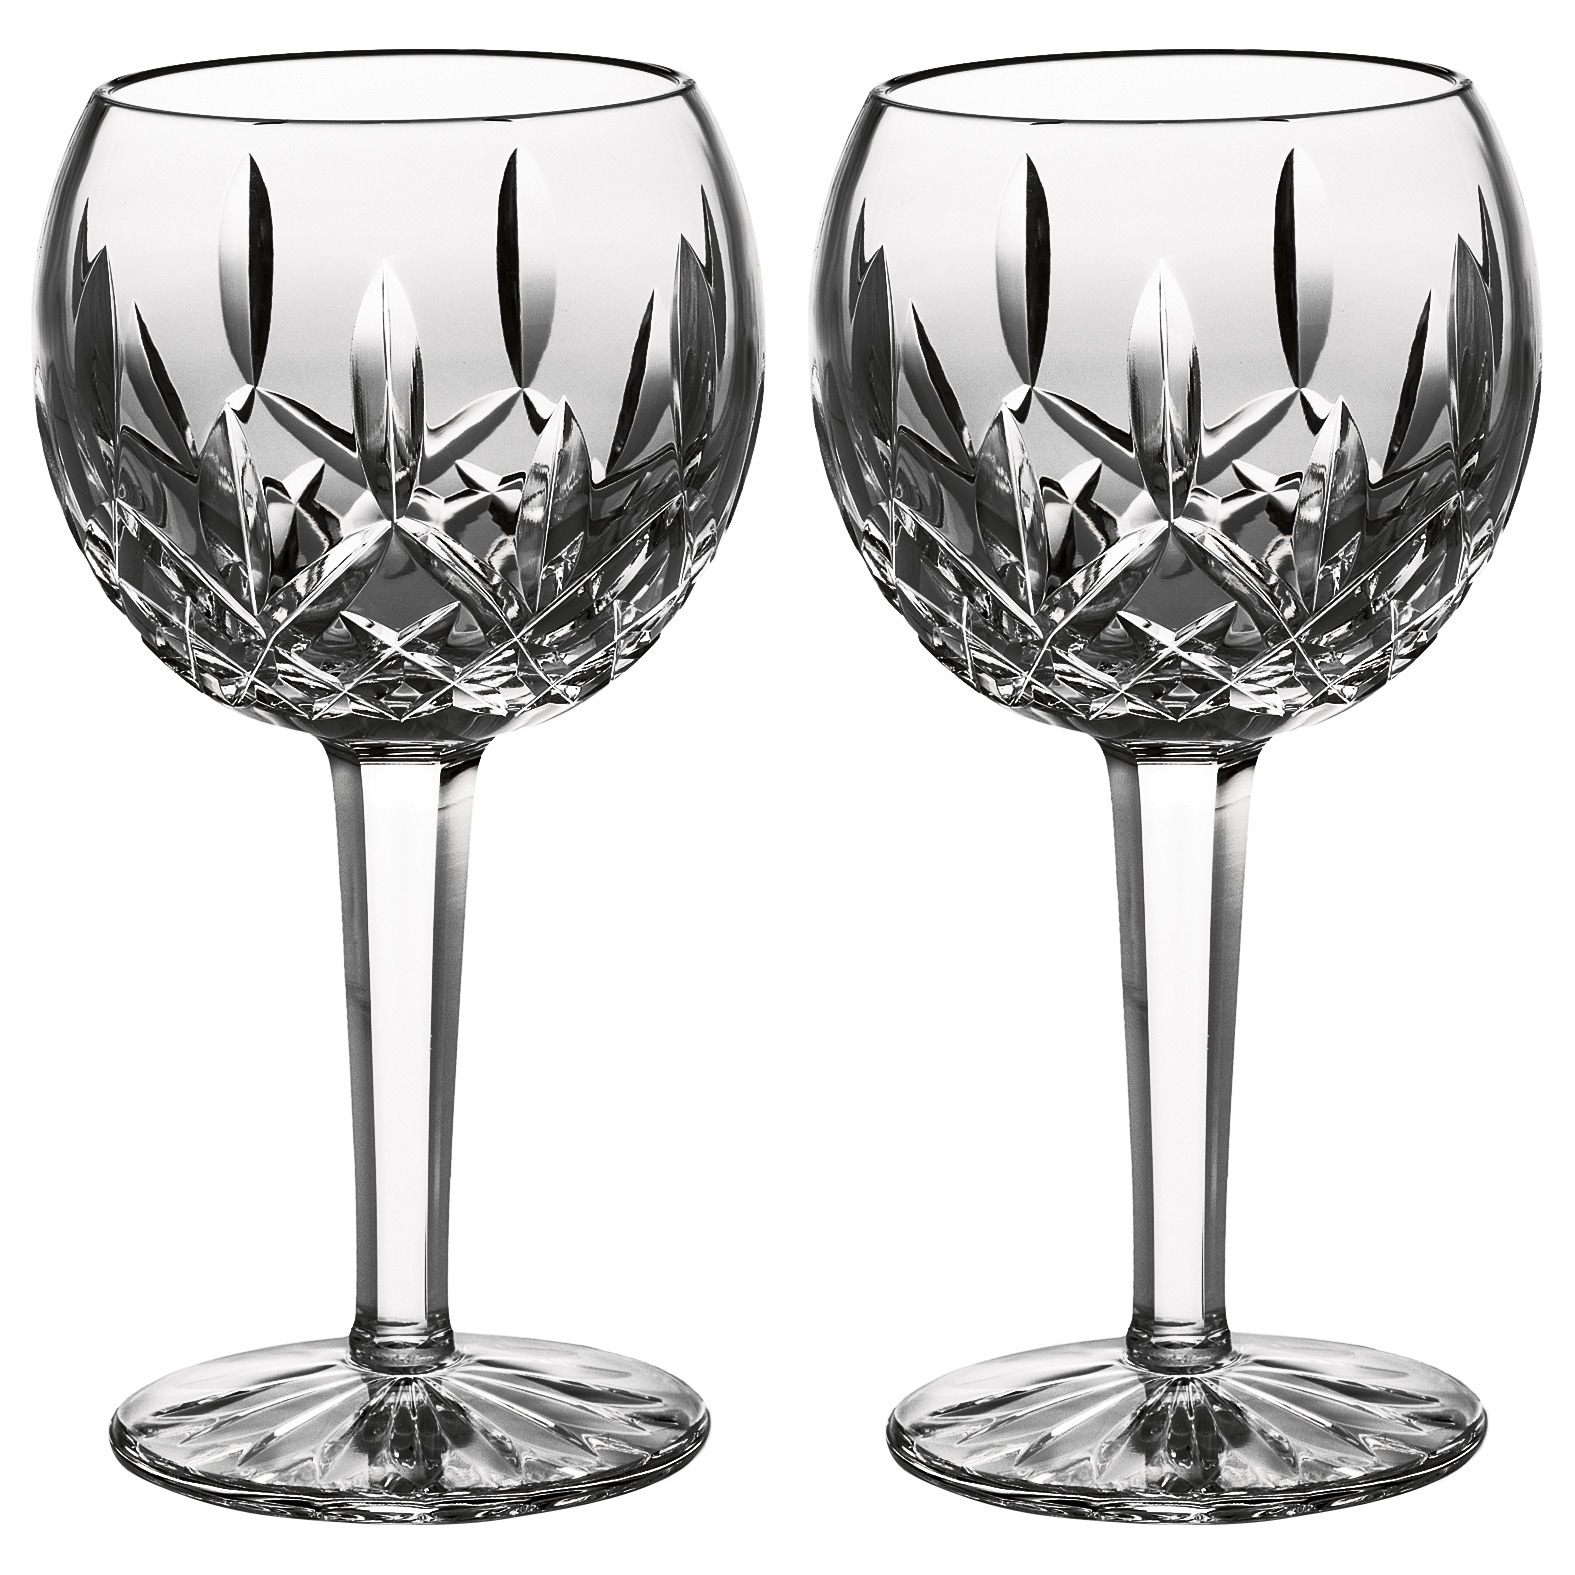 https://ak1.ostkcdn.com/images/products/8610173/Waterford-Classic-Lismore-Balloon-Wine-Glasses-Set-of-2-L15877911.jpg